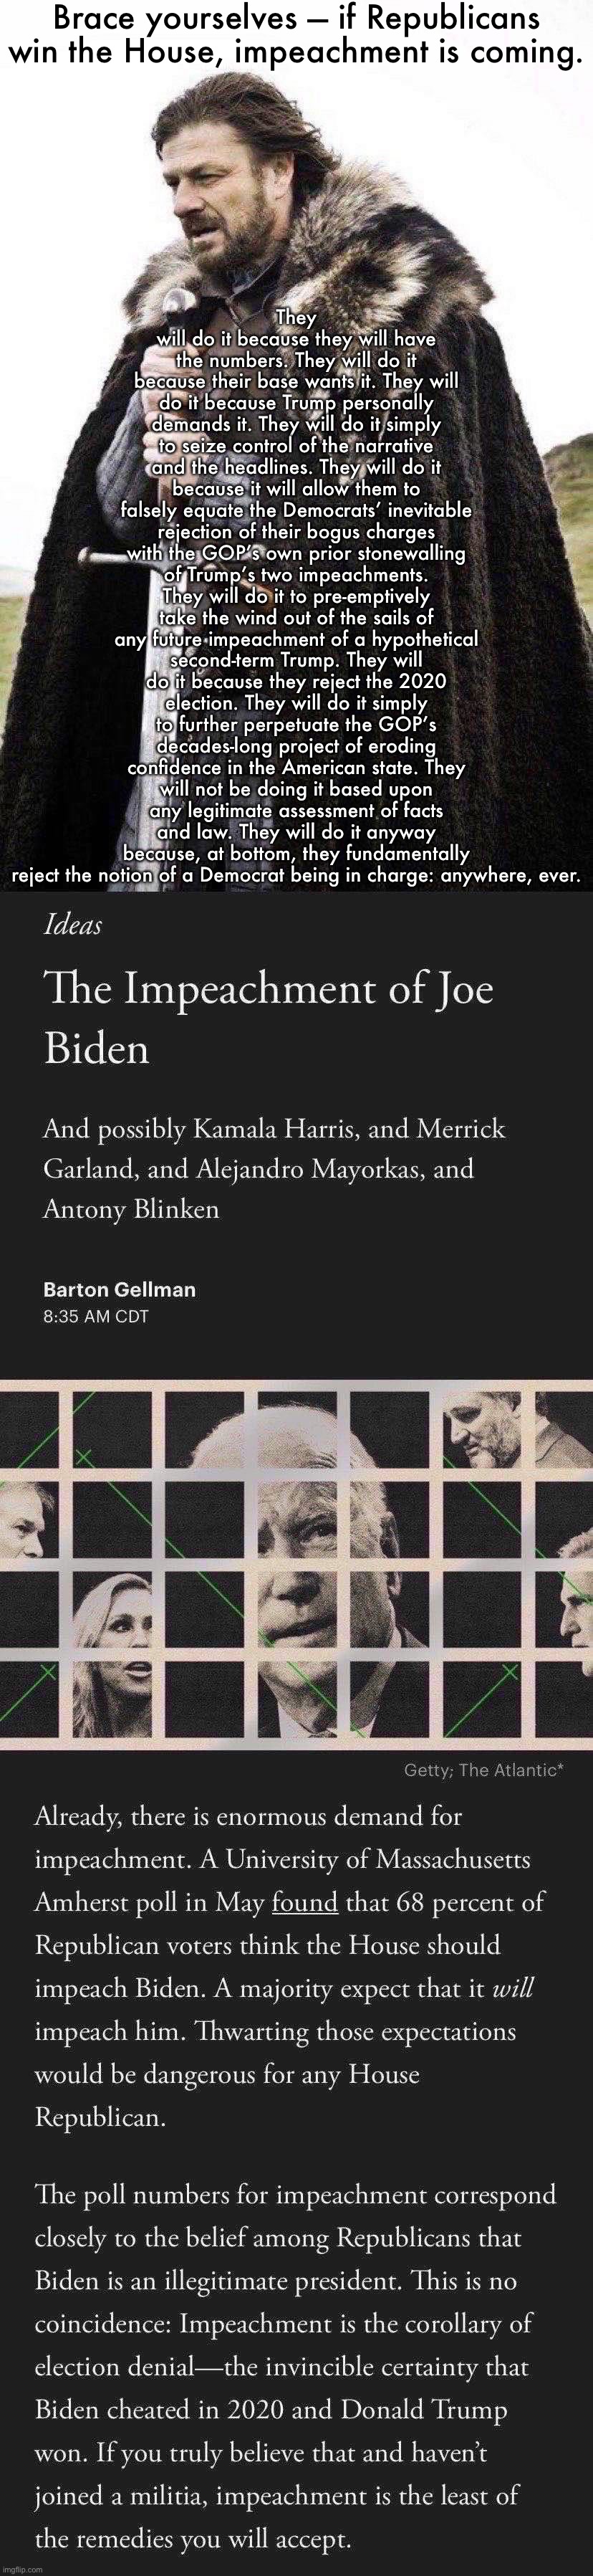 The inevitable impeachment of Biden: “sound and fury, signifying nothing.” | Brace yourselves — if Republicans win the House, impeachment is coming. They will do it because they will have the numbers. They will do it because their base wants it. They will do it because Trump personally demands it. They will do it simply to seize control of the narrative and the headlines. They will do it because it will allow them to falsely equate the Democrats’ inevitable rejection of their bogus charges with the GOP’s own prior stonewalling of Trump’s two impeachments. They will do it to pre-emptively take the wind out of the sails of any future impeachment of a hypothetical second-term Trump. They will do it because they reject the 2020 election. They will do it simply to further perpetuate the GOP’s decades-long project of eroding confidence in the American state. They will not be doing it based upon any legitimate assessment of facts and law. They will do it anyway because, at bottom, they fundamentally reject the notion of a Democrat being in charge: anywhere, ever. | image tagged in brace yourself,the impeachment of joe biden | made w/ Imgflip meme maker